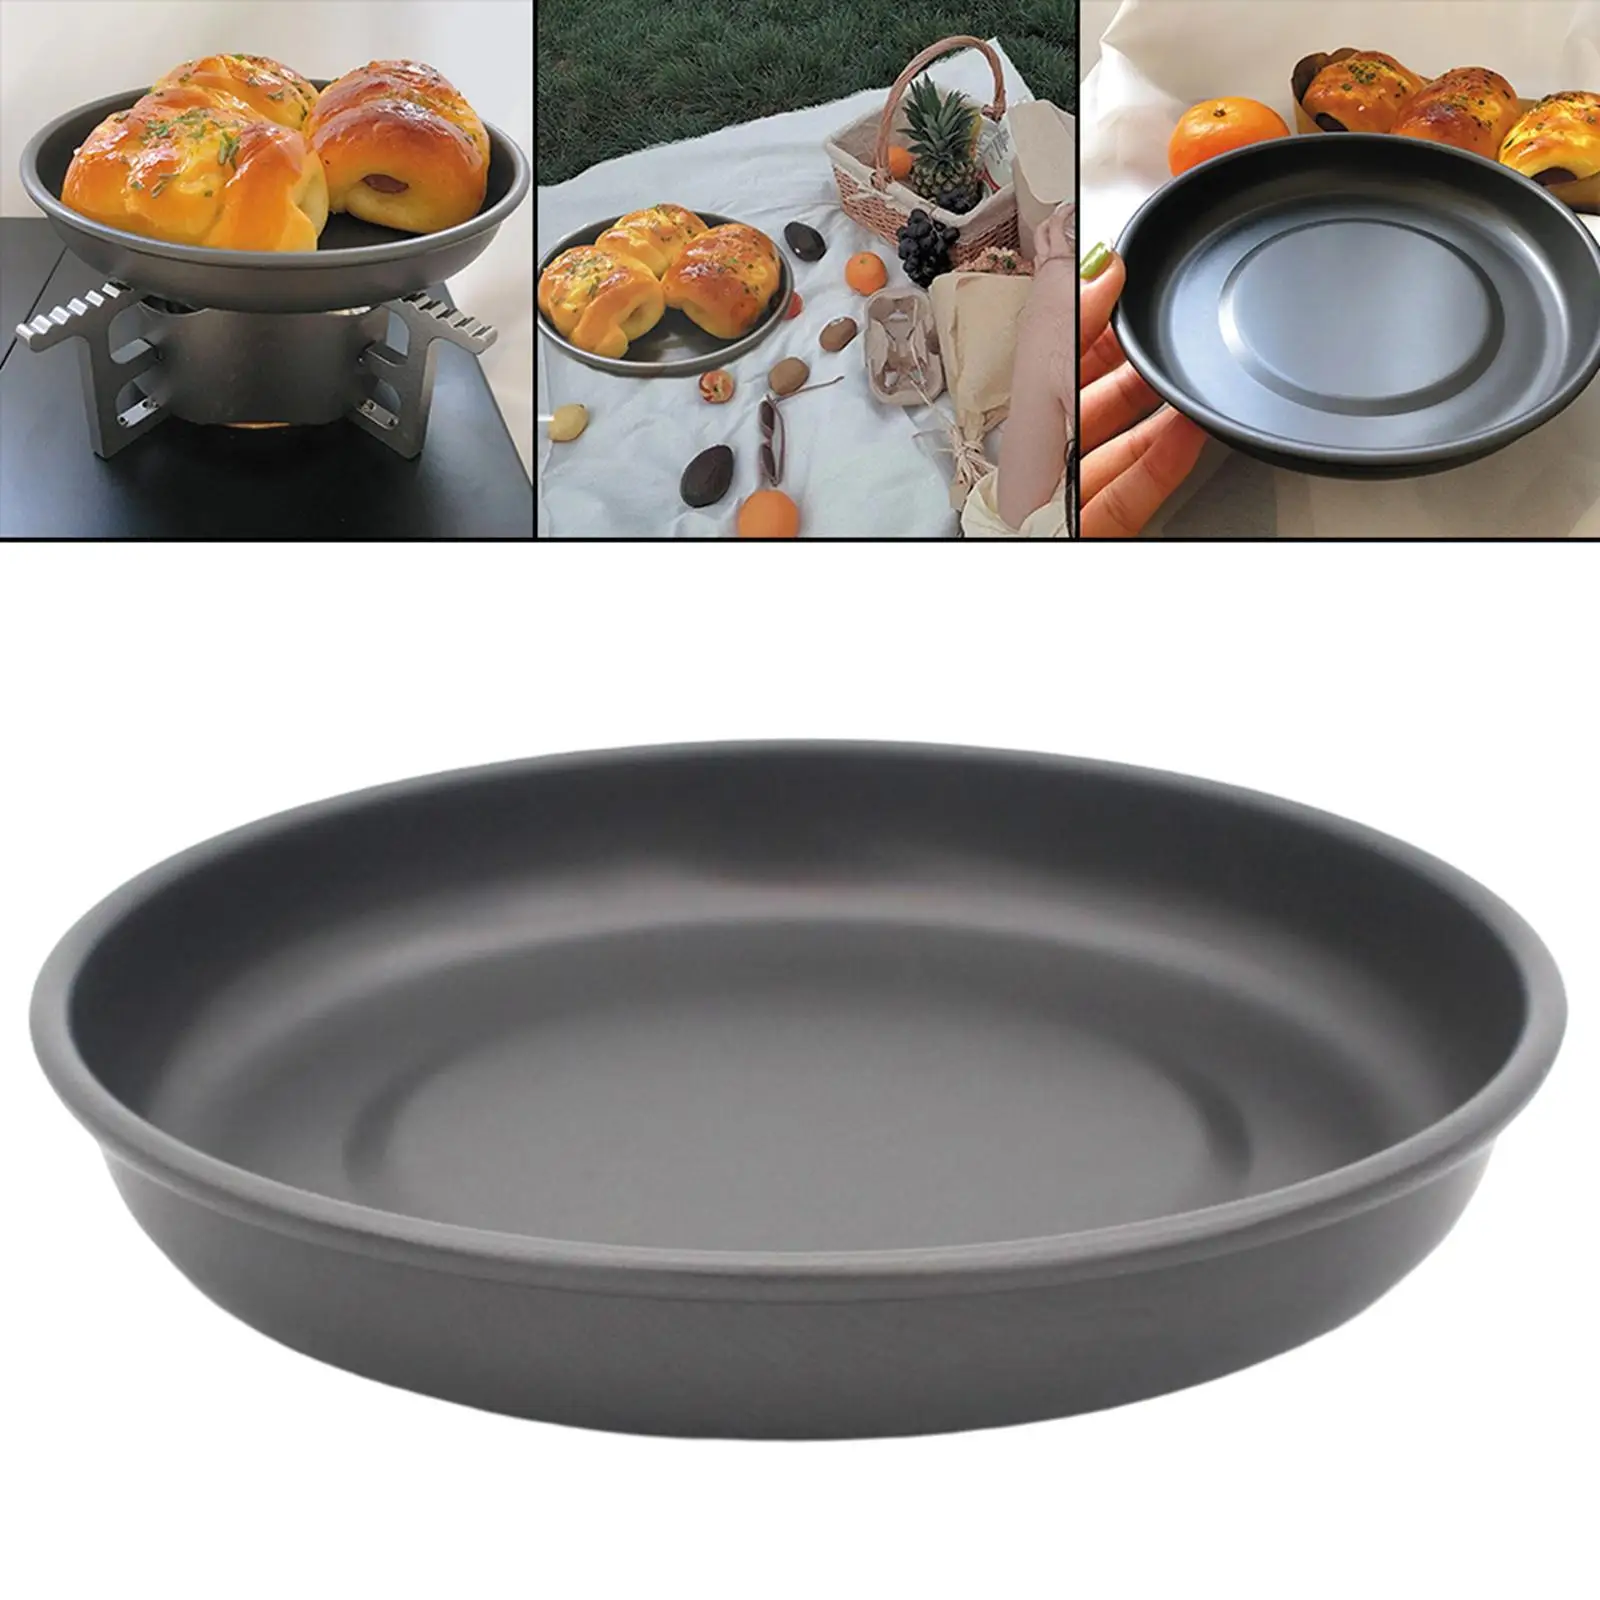 300ml Dinner Plate Round Dish Tray Serving Plates Cooking Utensil Food Container Portable Food Plate Cookware for BBQ Picnic